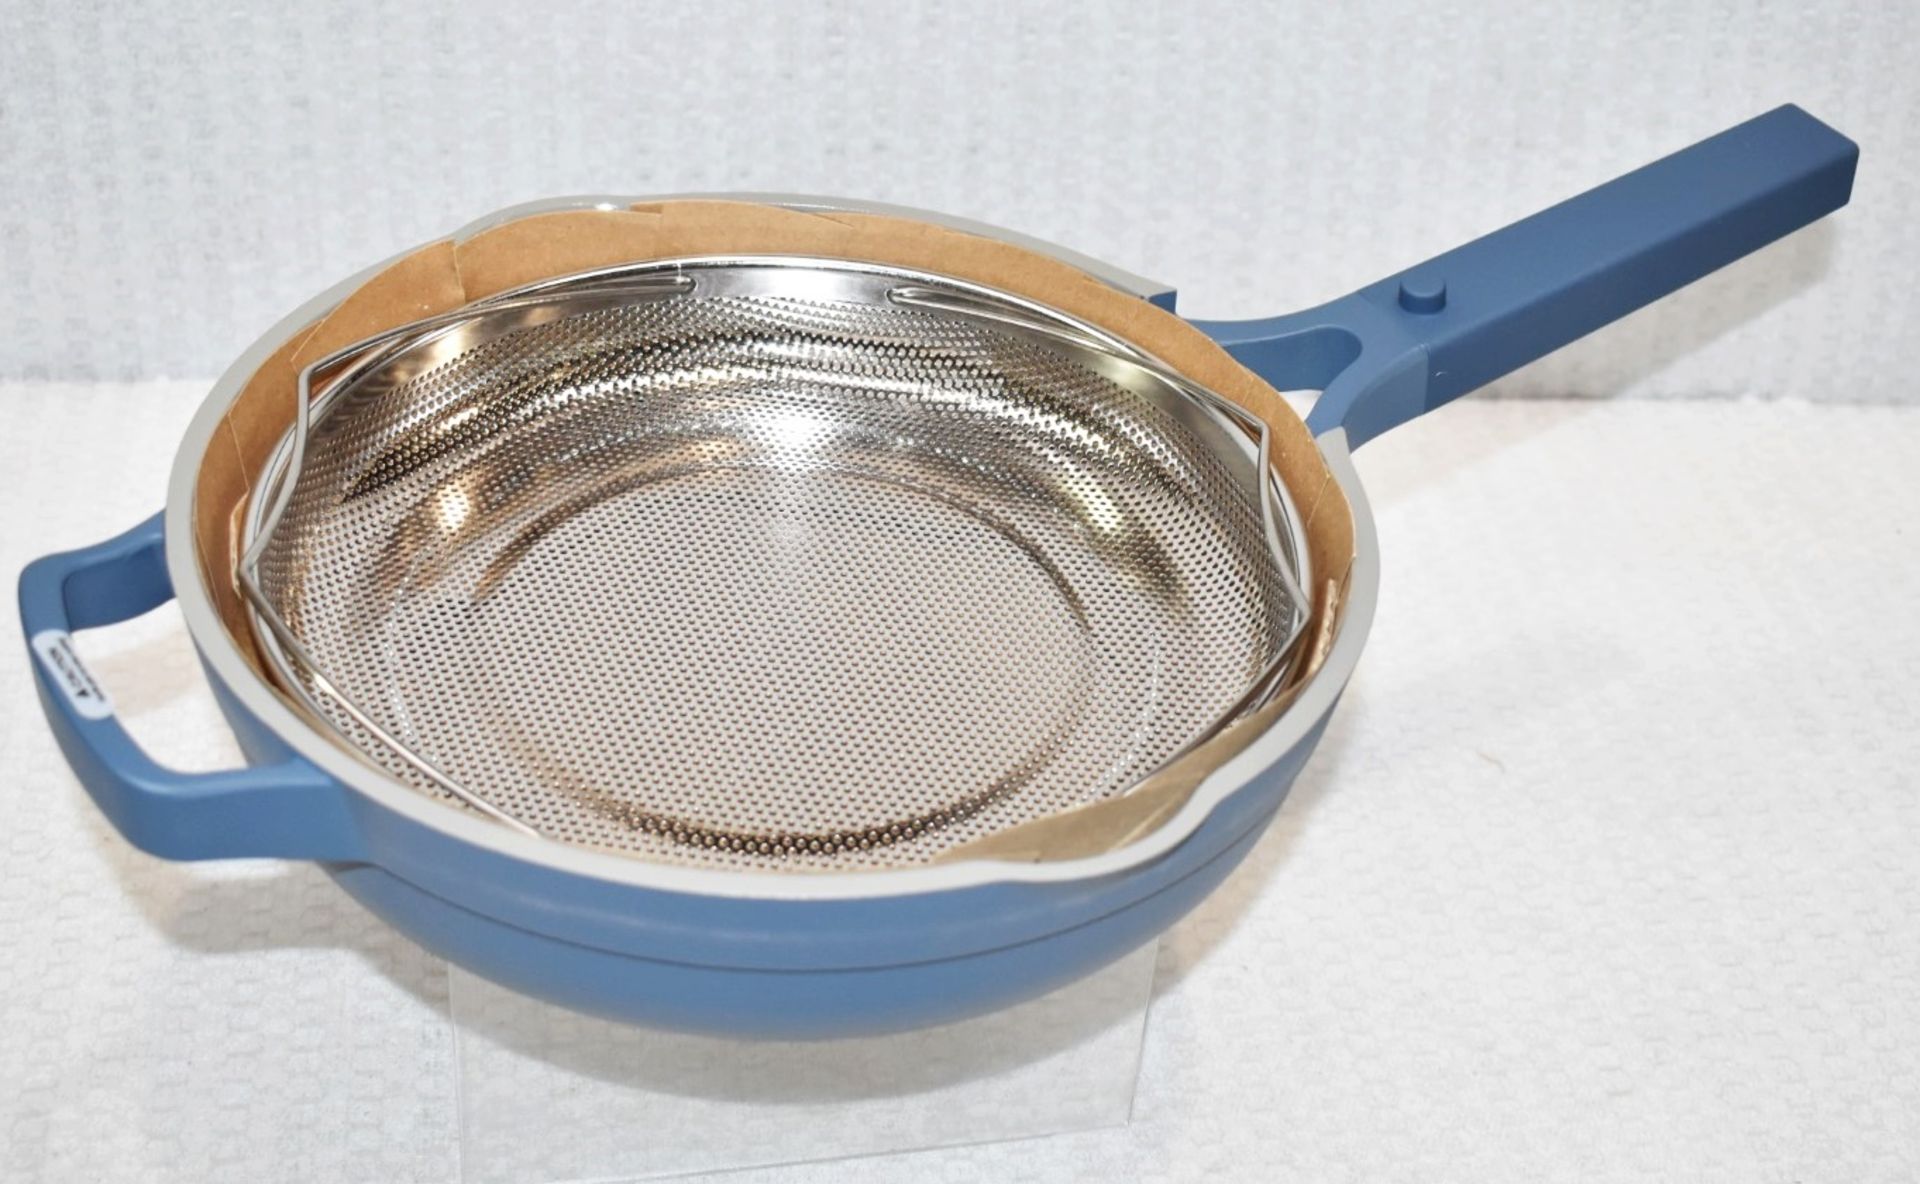 1 x OUR PLACE Always Pan Set with Steel Steamer, in Blue (26.5cm) - Original Price £155.00 - Image 3 of 14